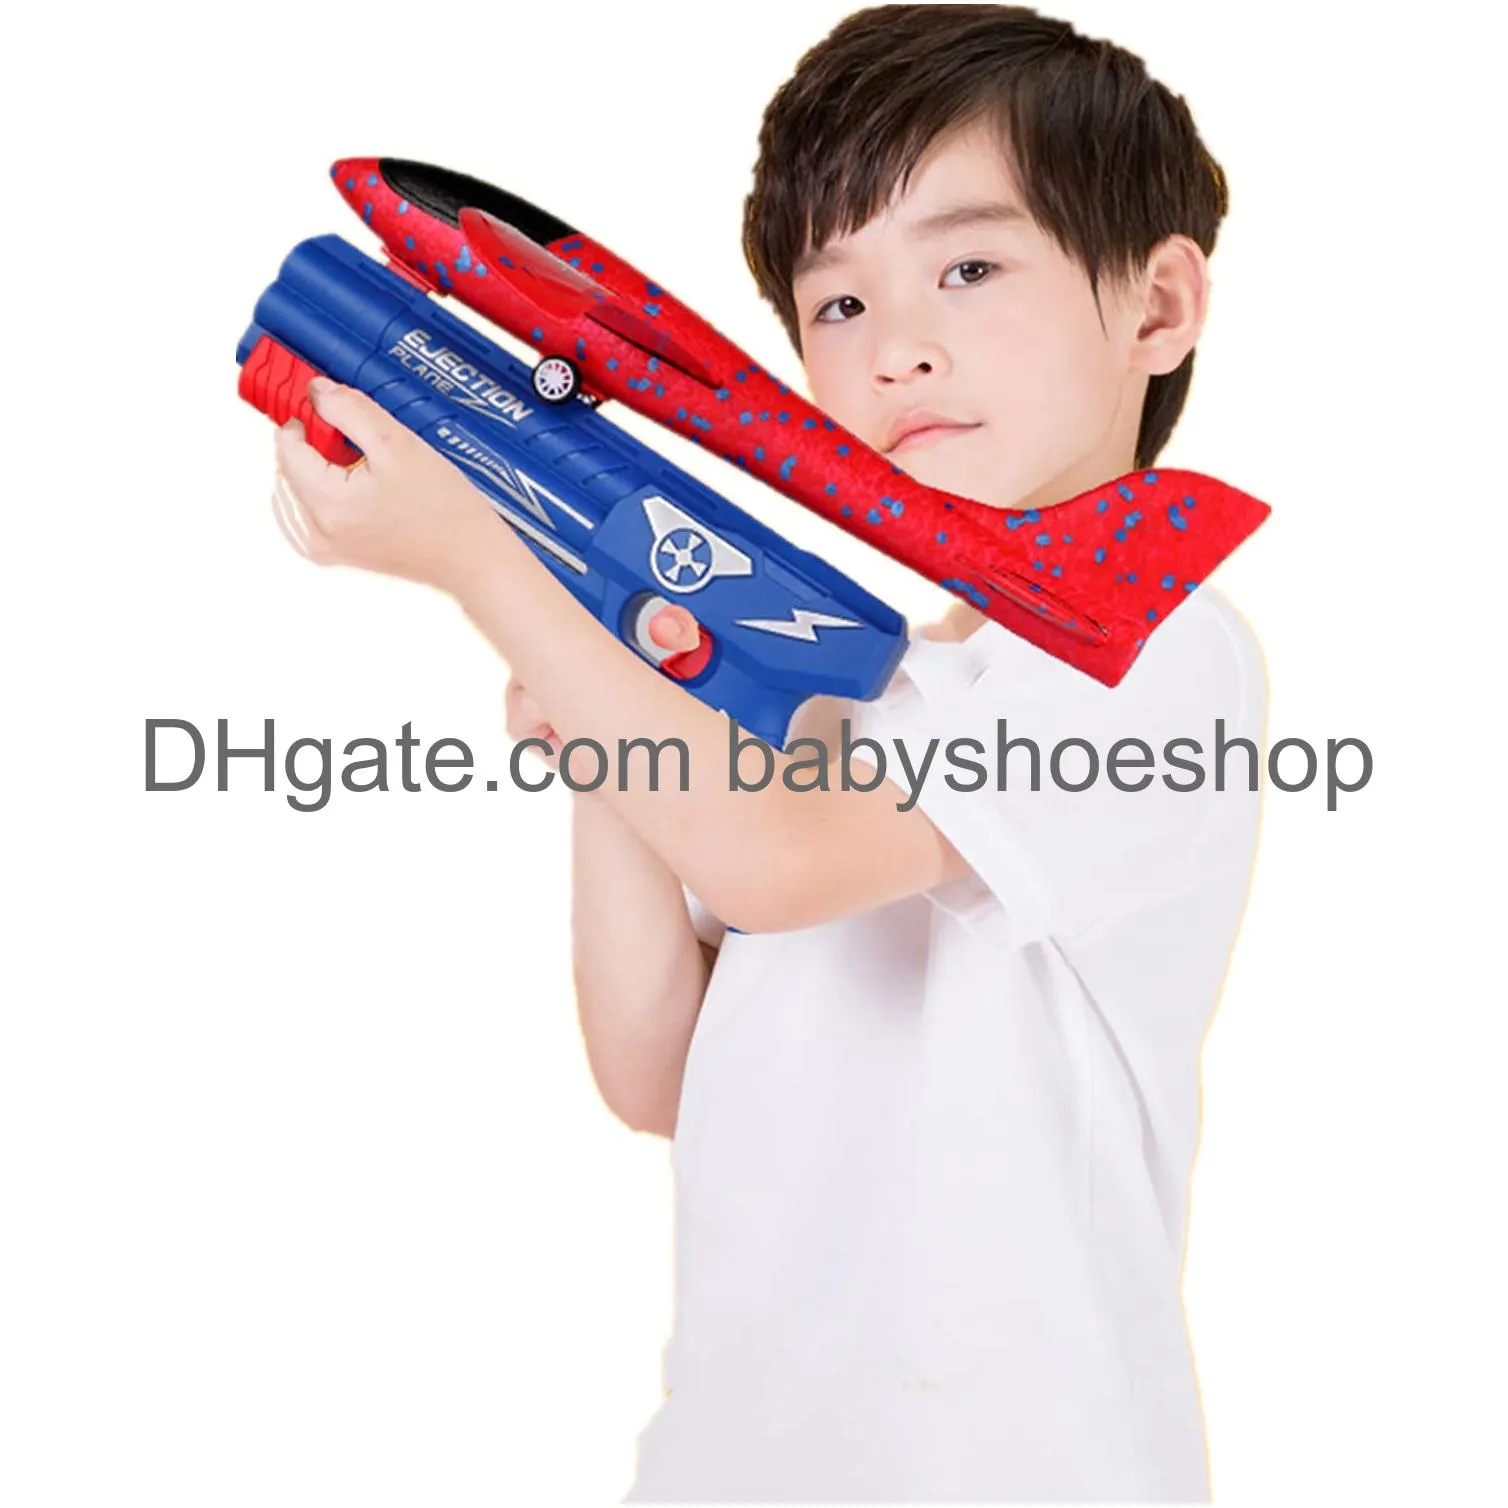 florong airplane toy oneclick ejection model foam airplane with large throwing foam plane flying toy for kids